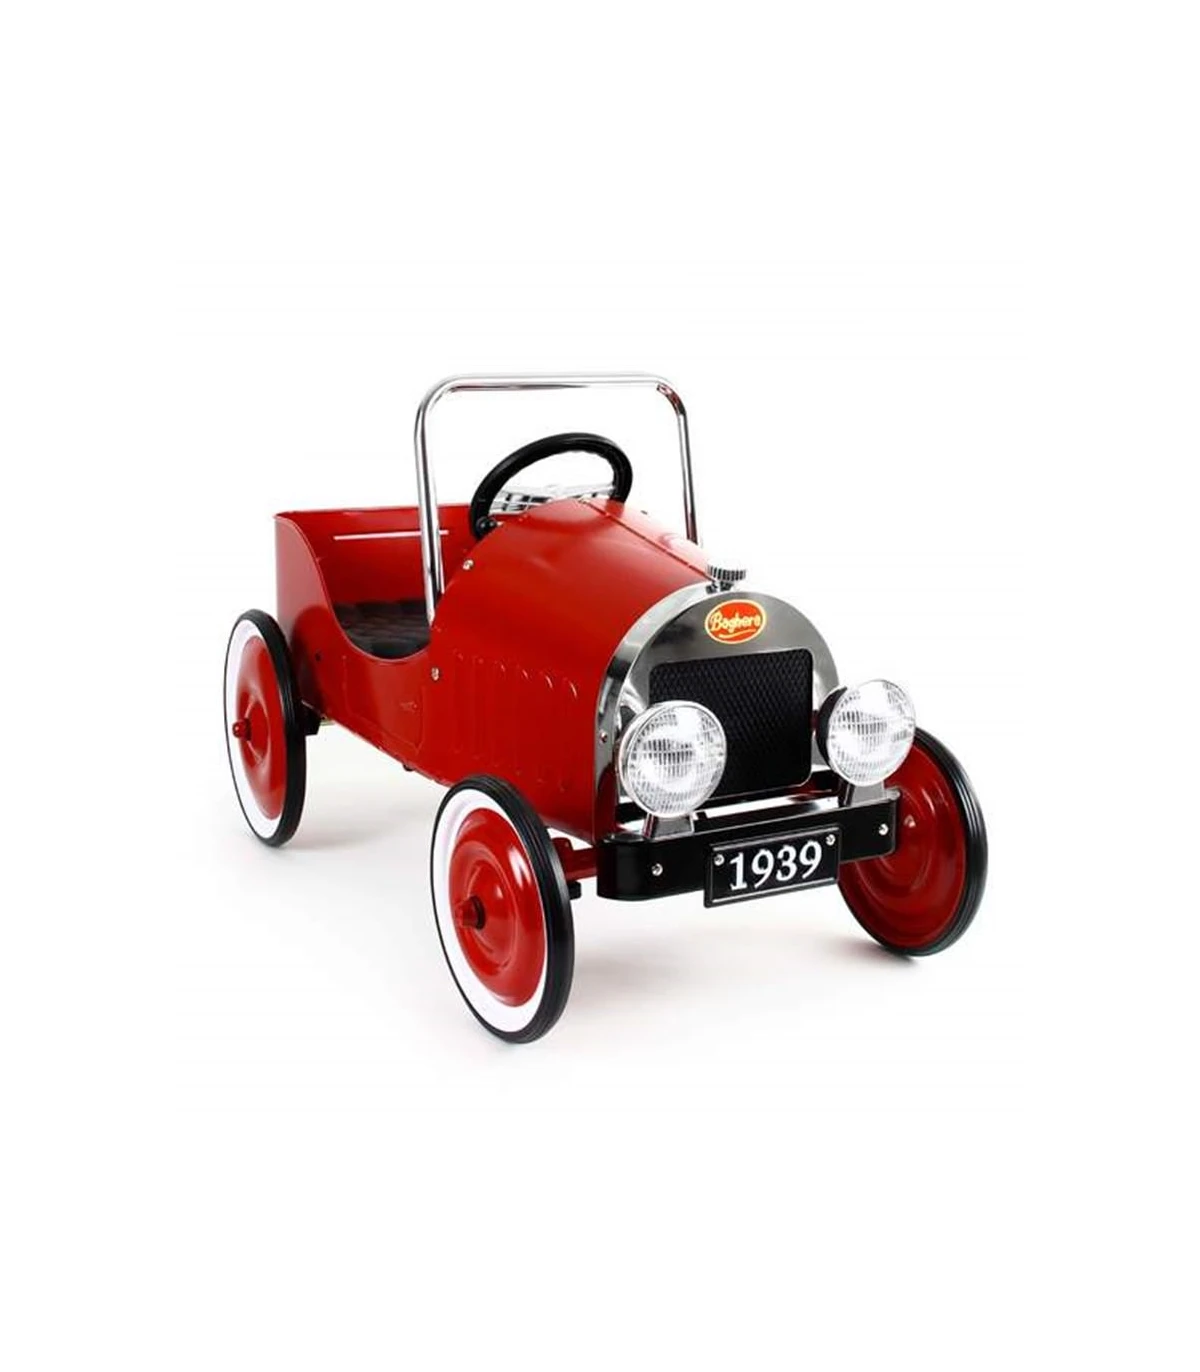 https://www.frezzo.ch/12844-superlarge_default/voiture-a-pedales-baghera-classic-rouge.webp